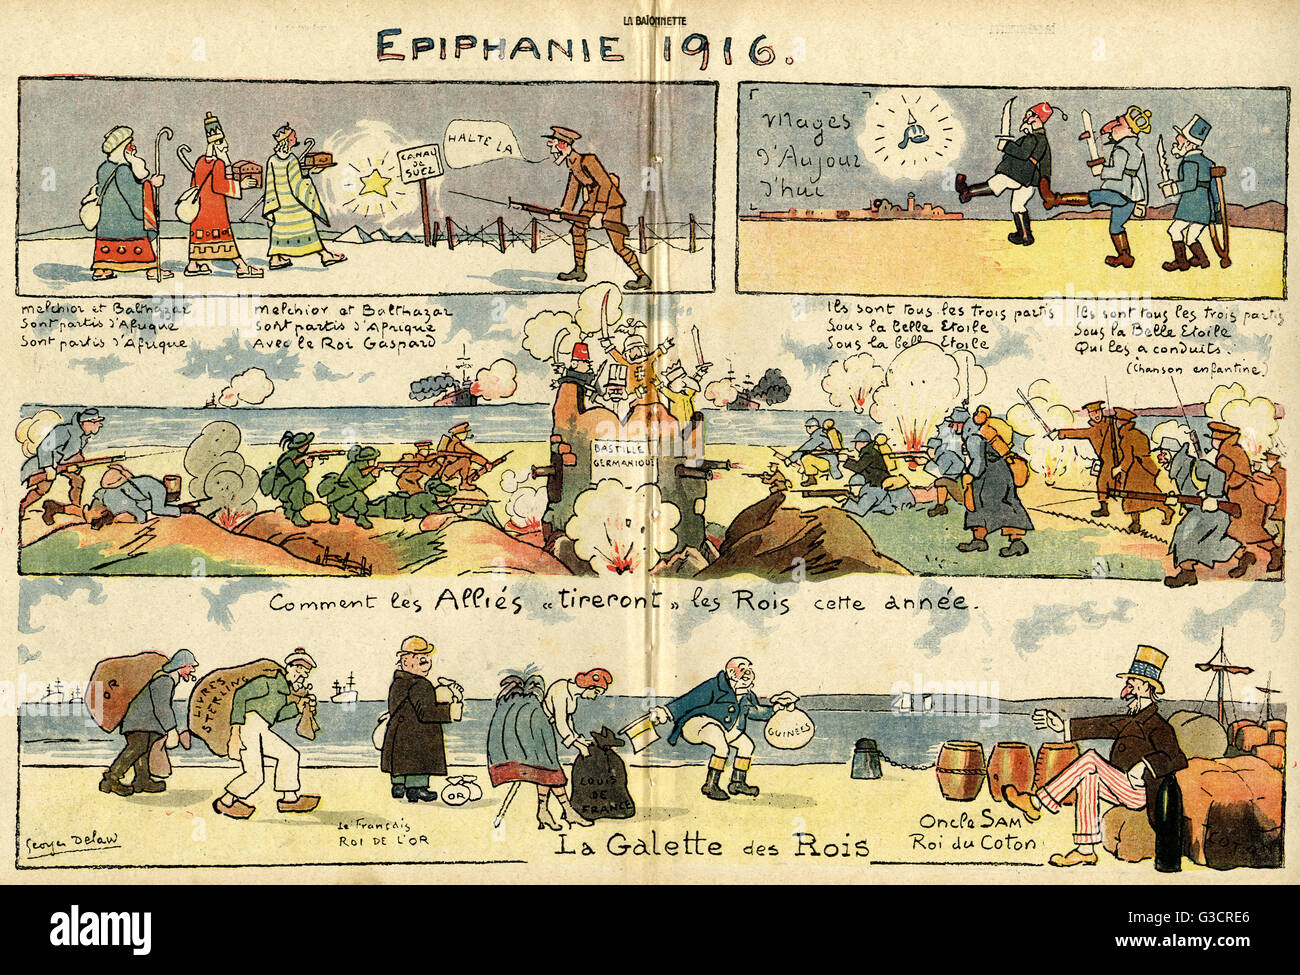 Cartoon, Epiphany 1916, illustrating a contemporary version of a children's song about the Three Kings.  Here, the three kings are from Turkey, Bulgaria and Austria, following the 'star' of Kaiser Wilhelm's shining helmet.  The central image shows how the Stock Photo